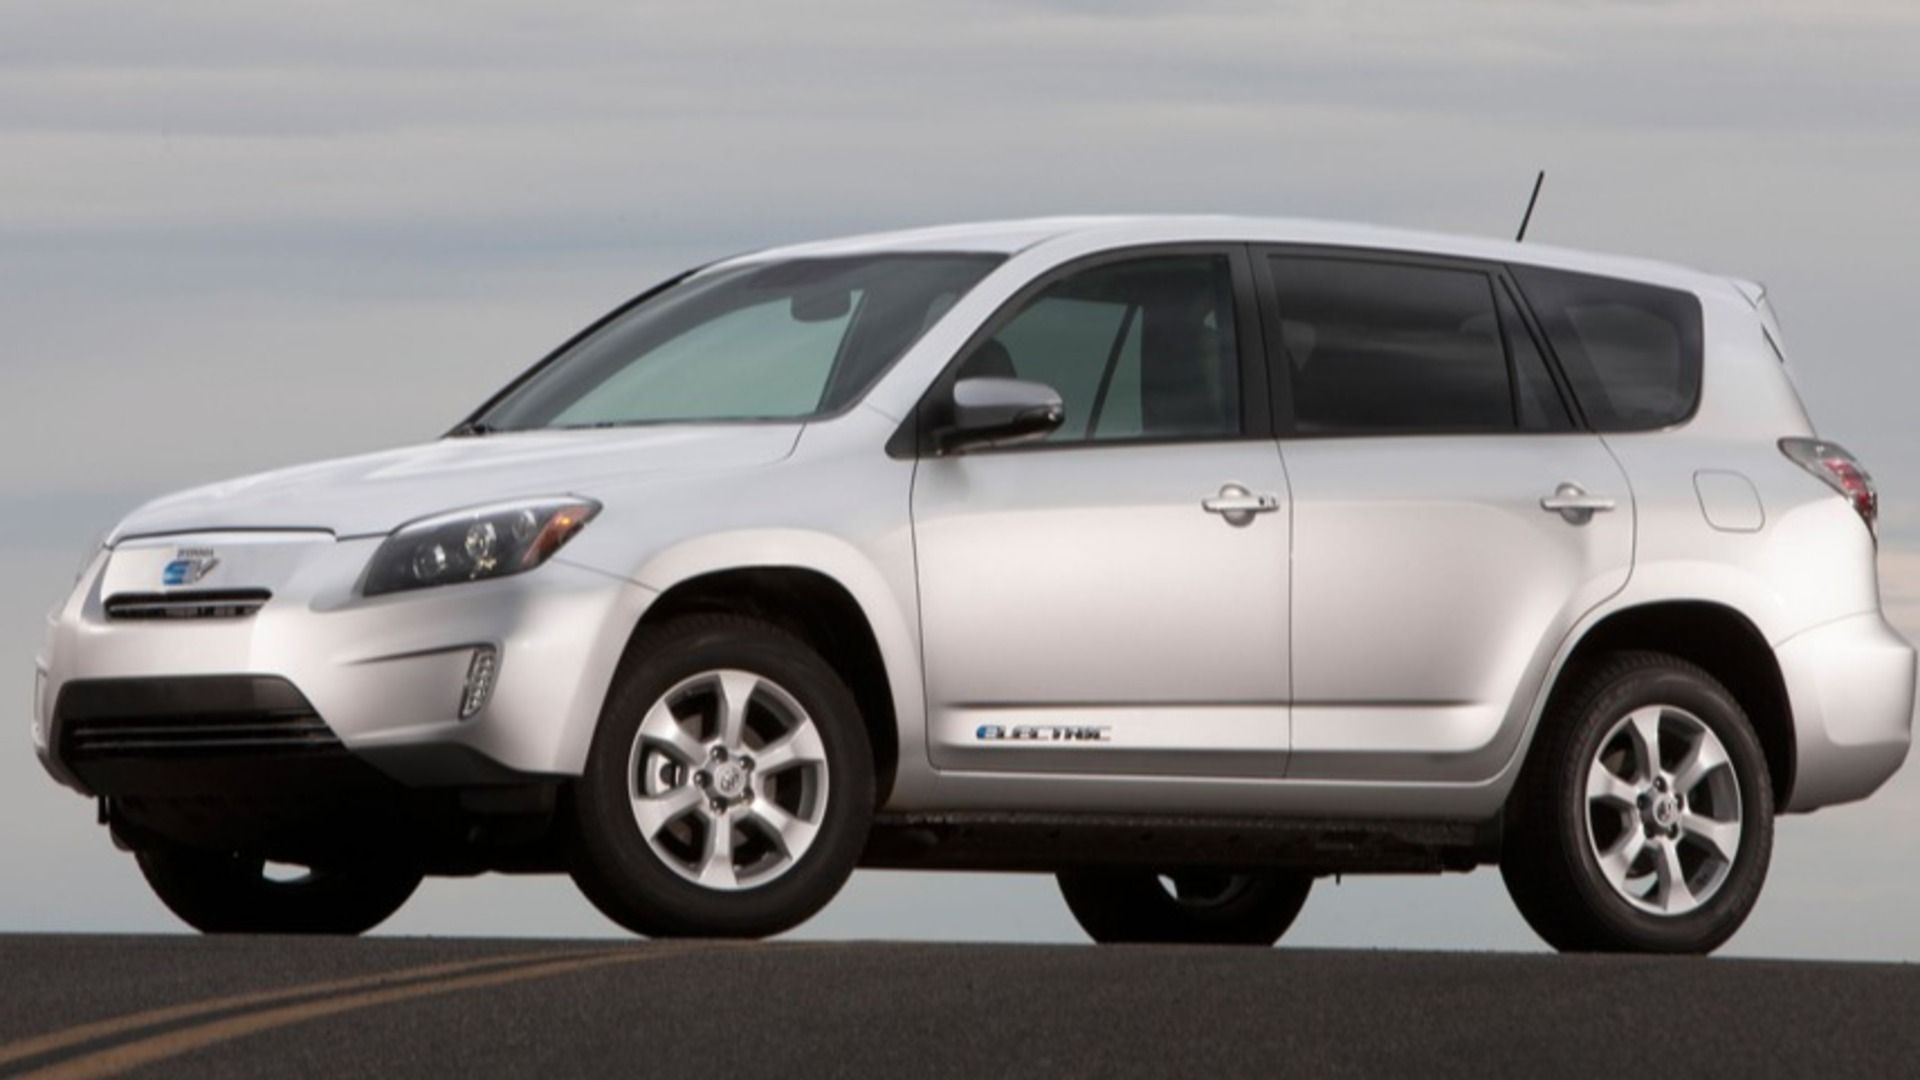 A forward-facing Toyota Rav4 EV in silver parked on a road